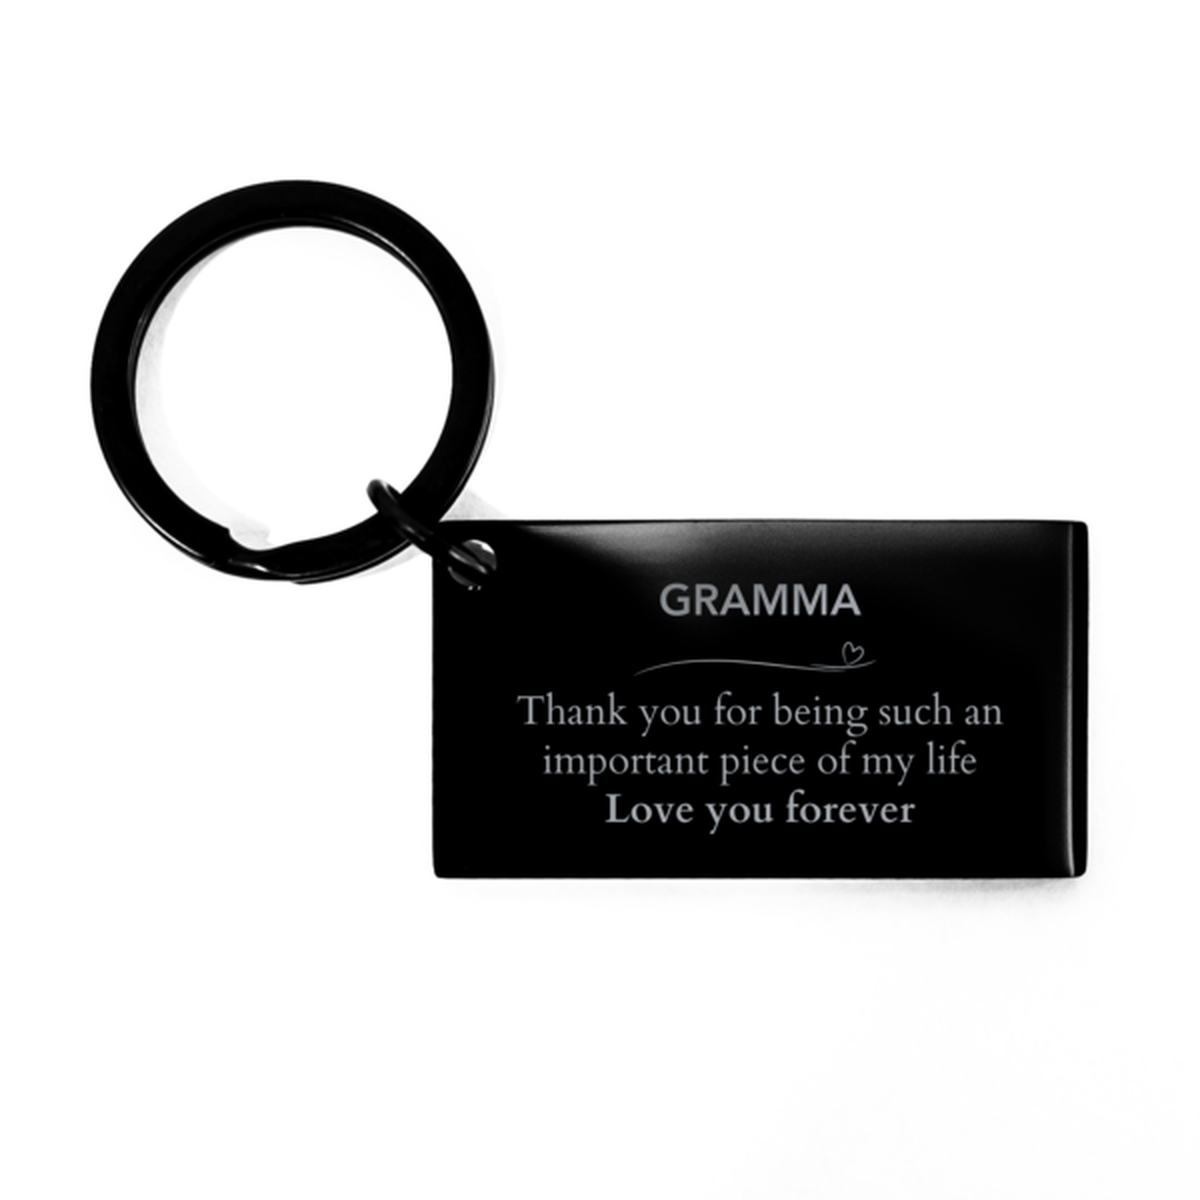 Appropriate Gramma Keychain Epic Birthday Gifts for Gramma Thank you for being such an important piece of my life Gramma Christmas Mothers Fathers Day